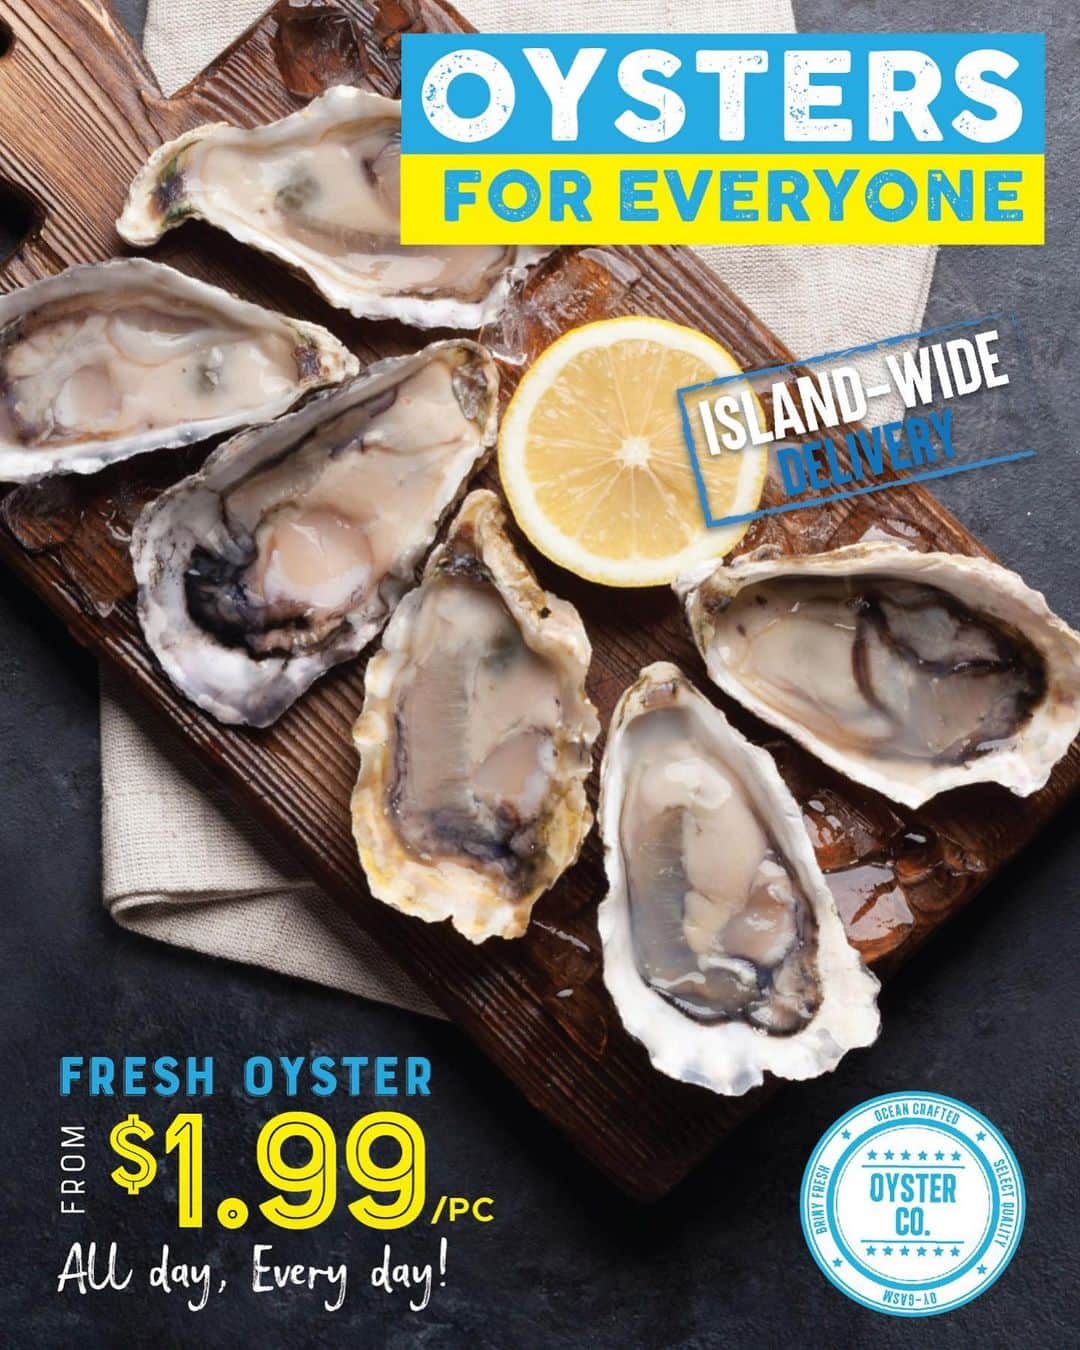 Oyster Co $1.99 Oysters